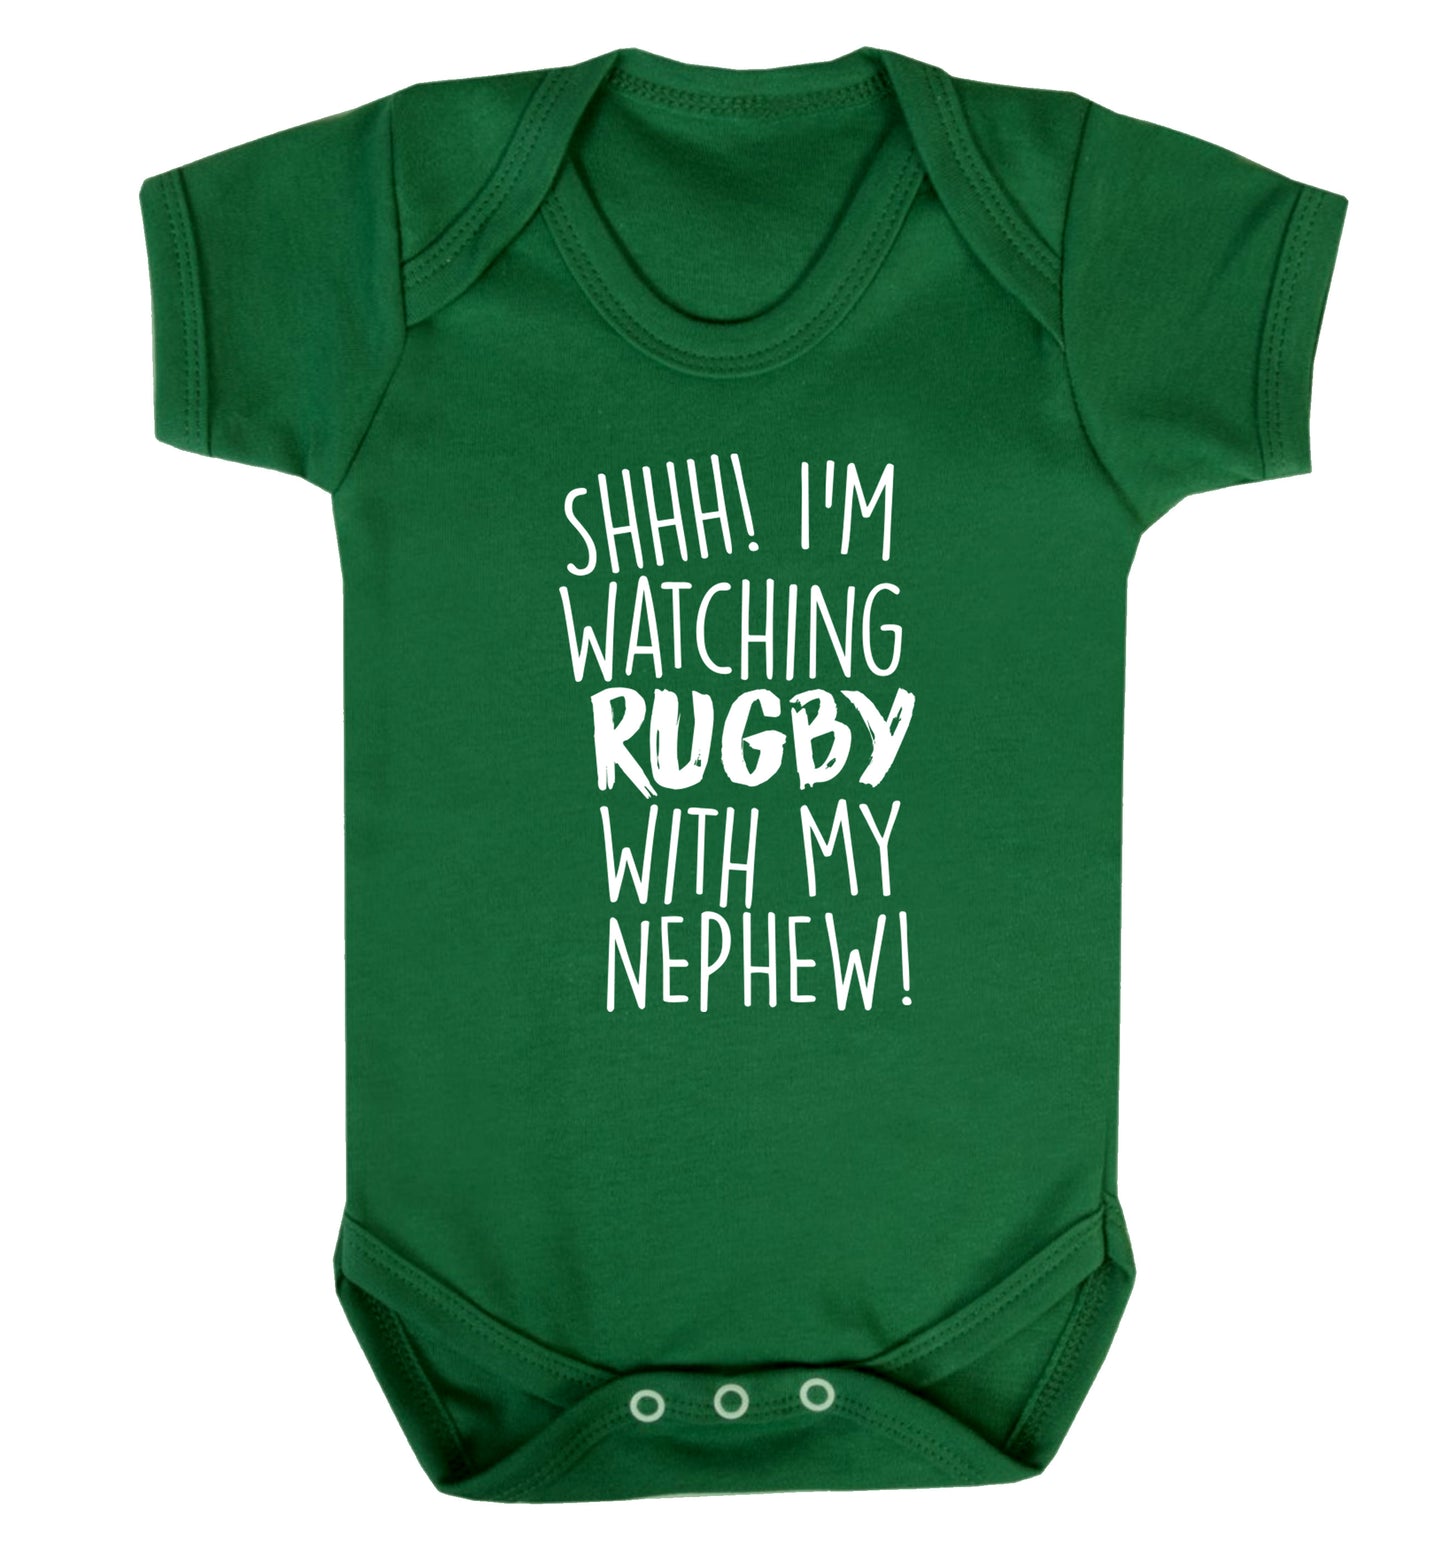 Shh.. I'm watching rugby with my nephew Baby Vest green 18-24 months